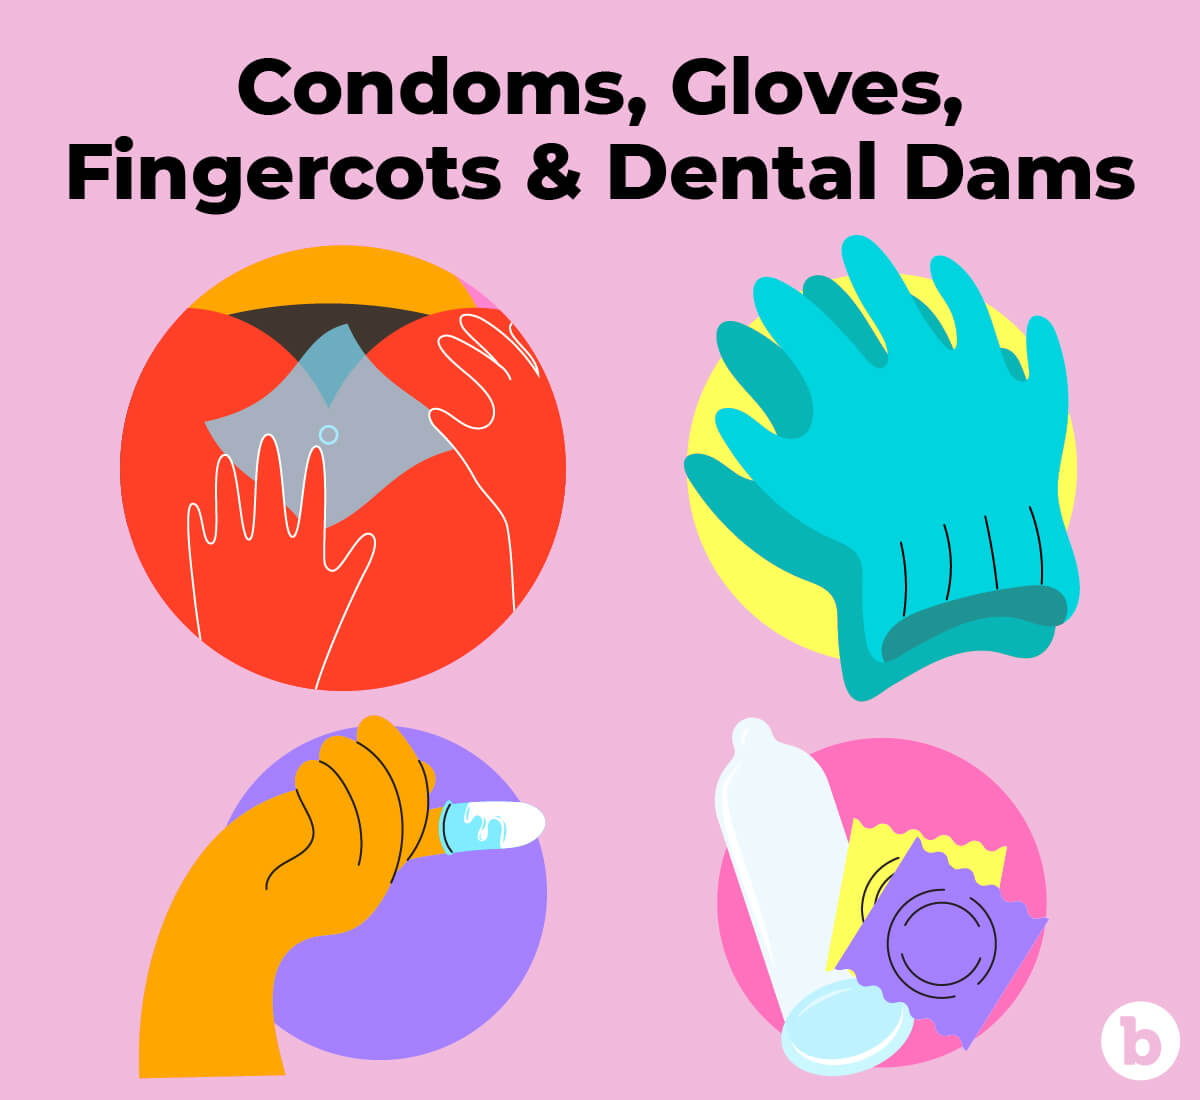 Condoms, gloves, fingercots, and dental dams are great safety barriers when it comes to anal sex